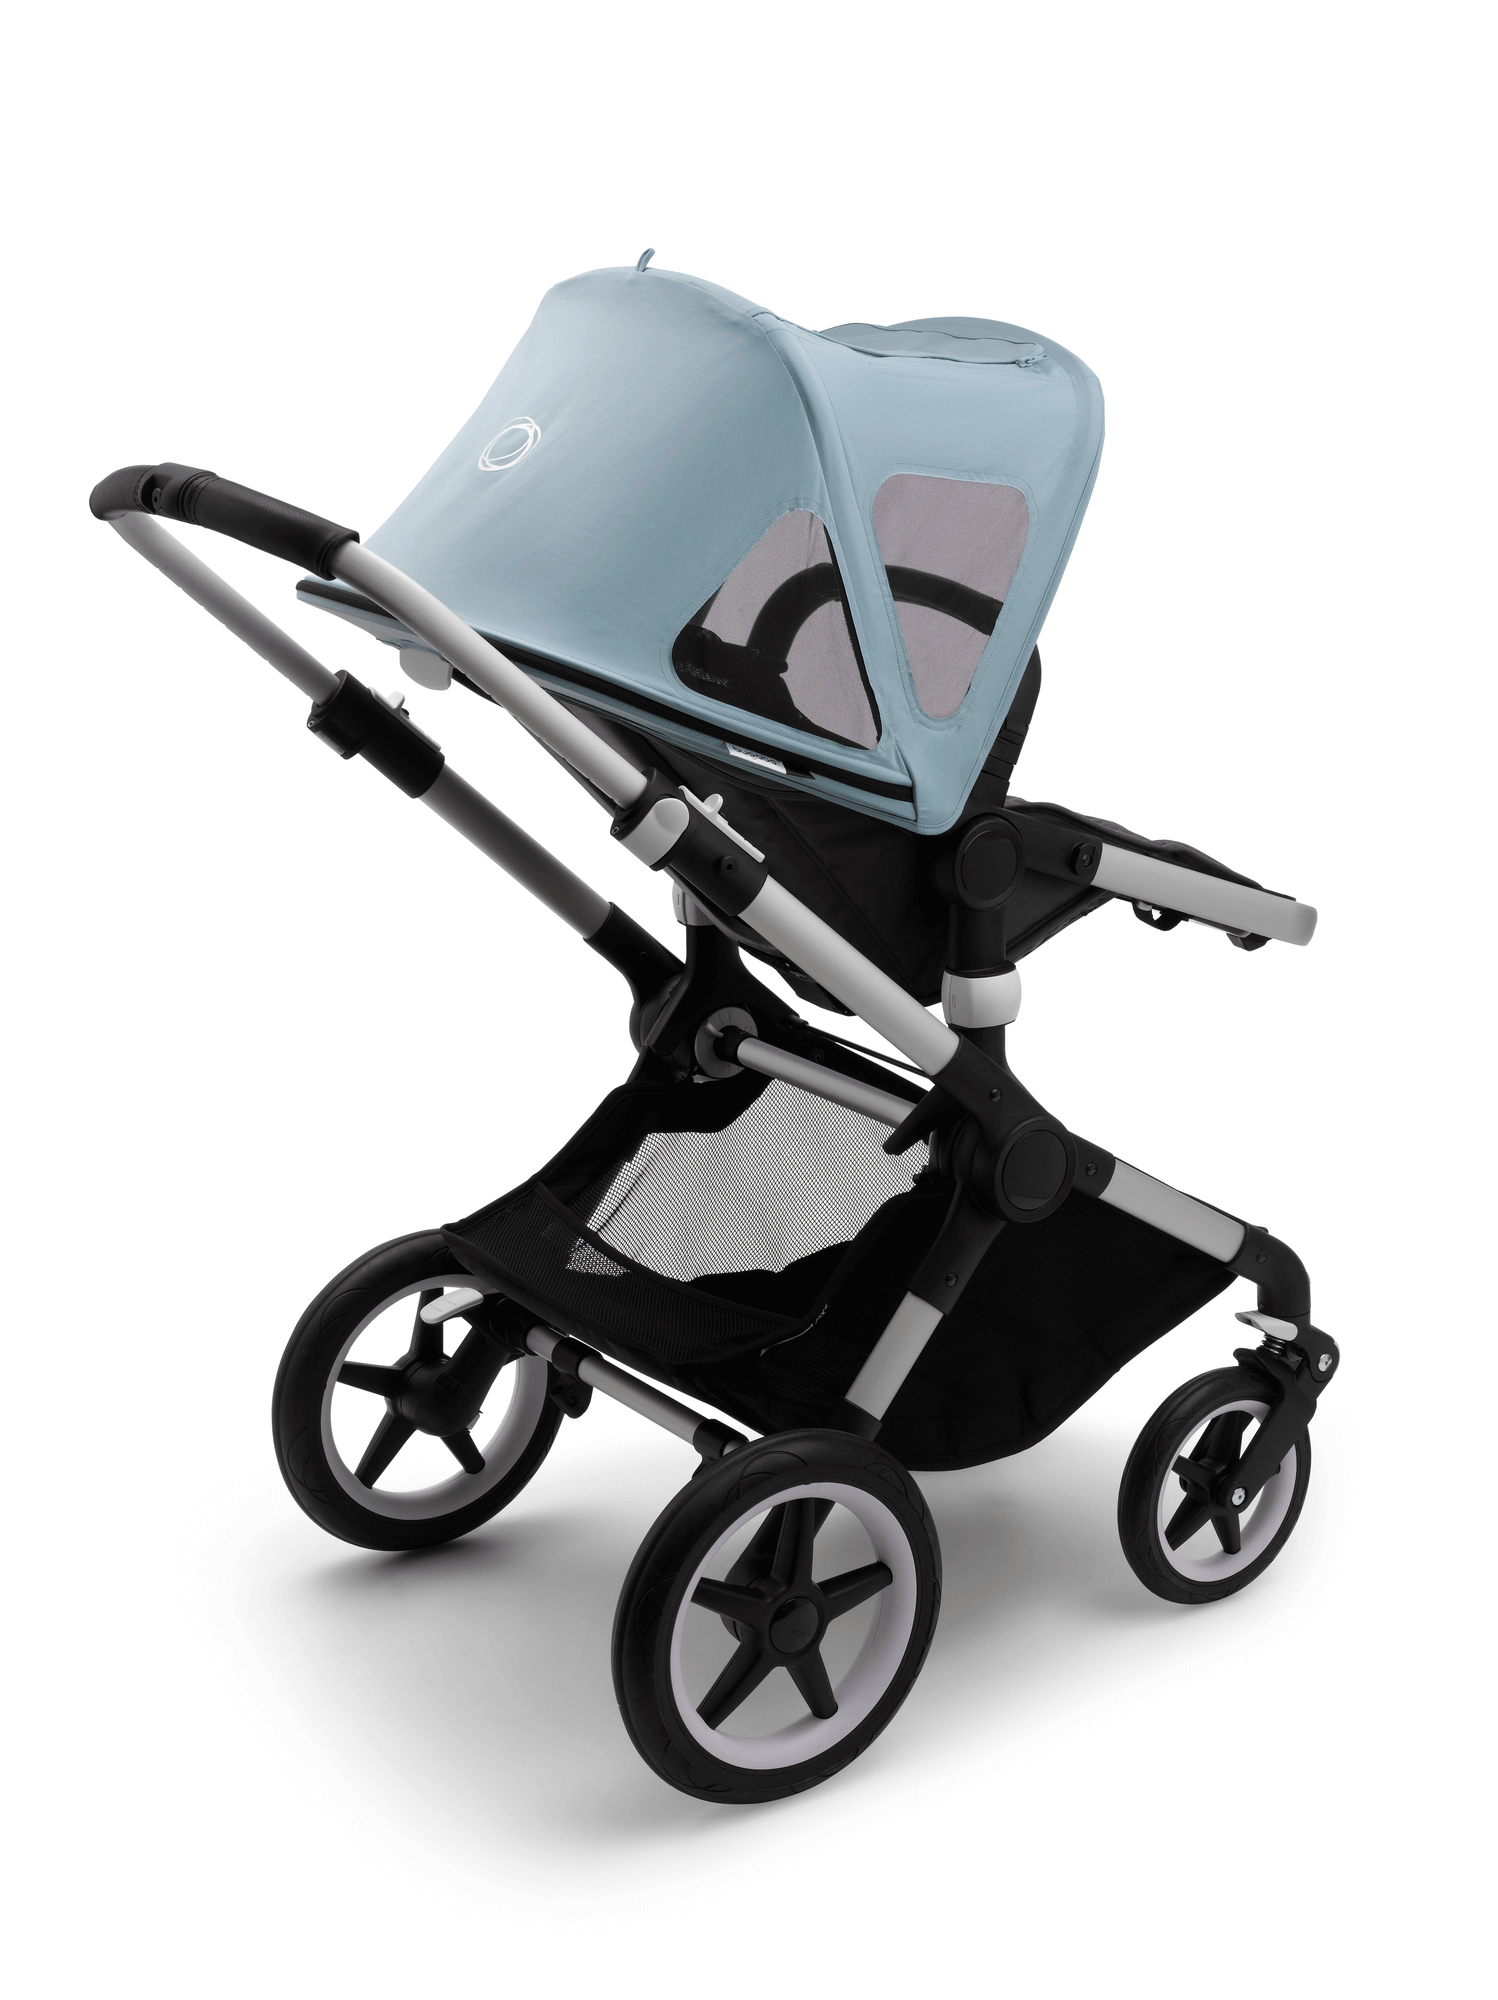 Grey Canopy Sun Shade Cover Wires for Bugaboo Cameleon 1 2 3 Frog Baby Stroller 